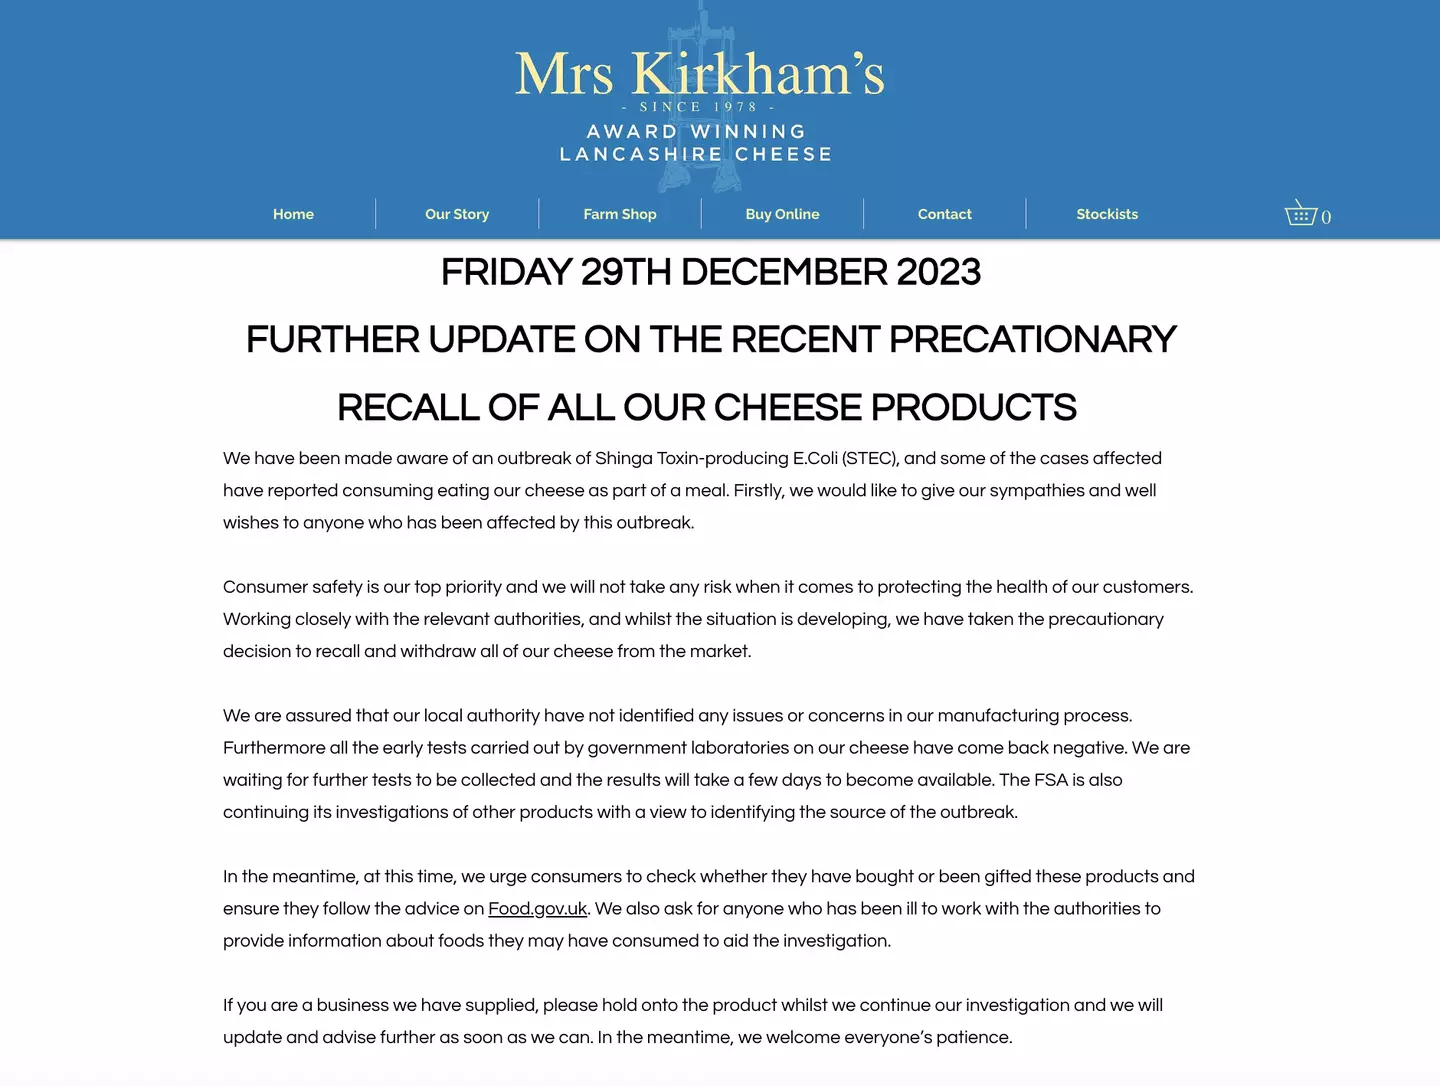 A snippet of the statement released by Mrs Kirkham's Lancashire Cheese.